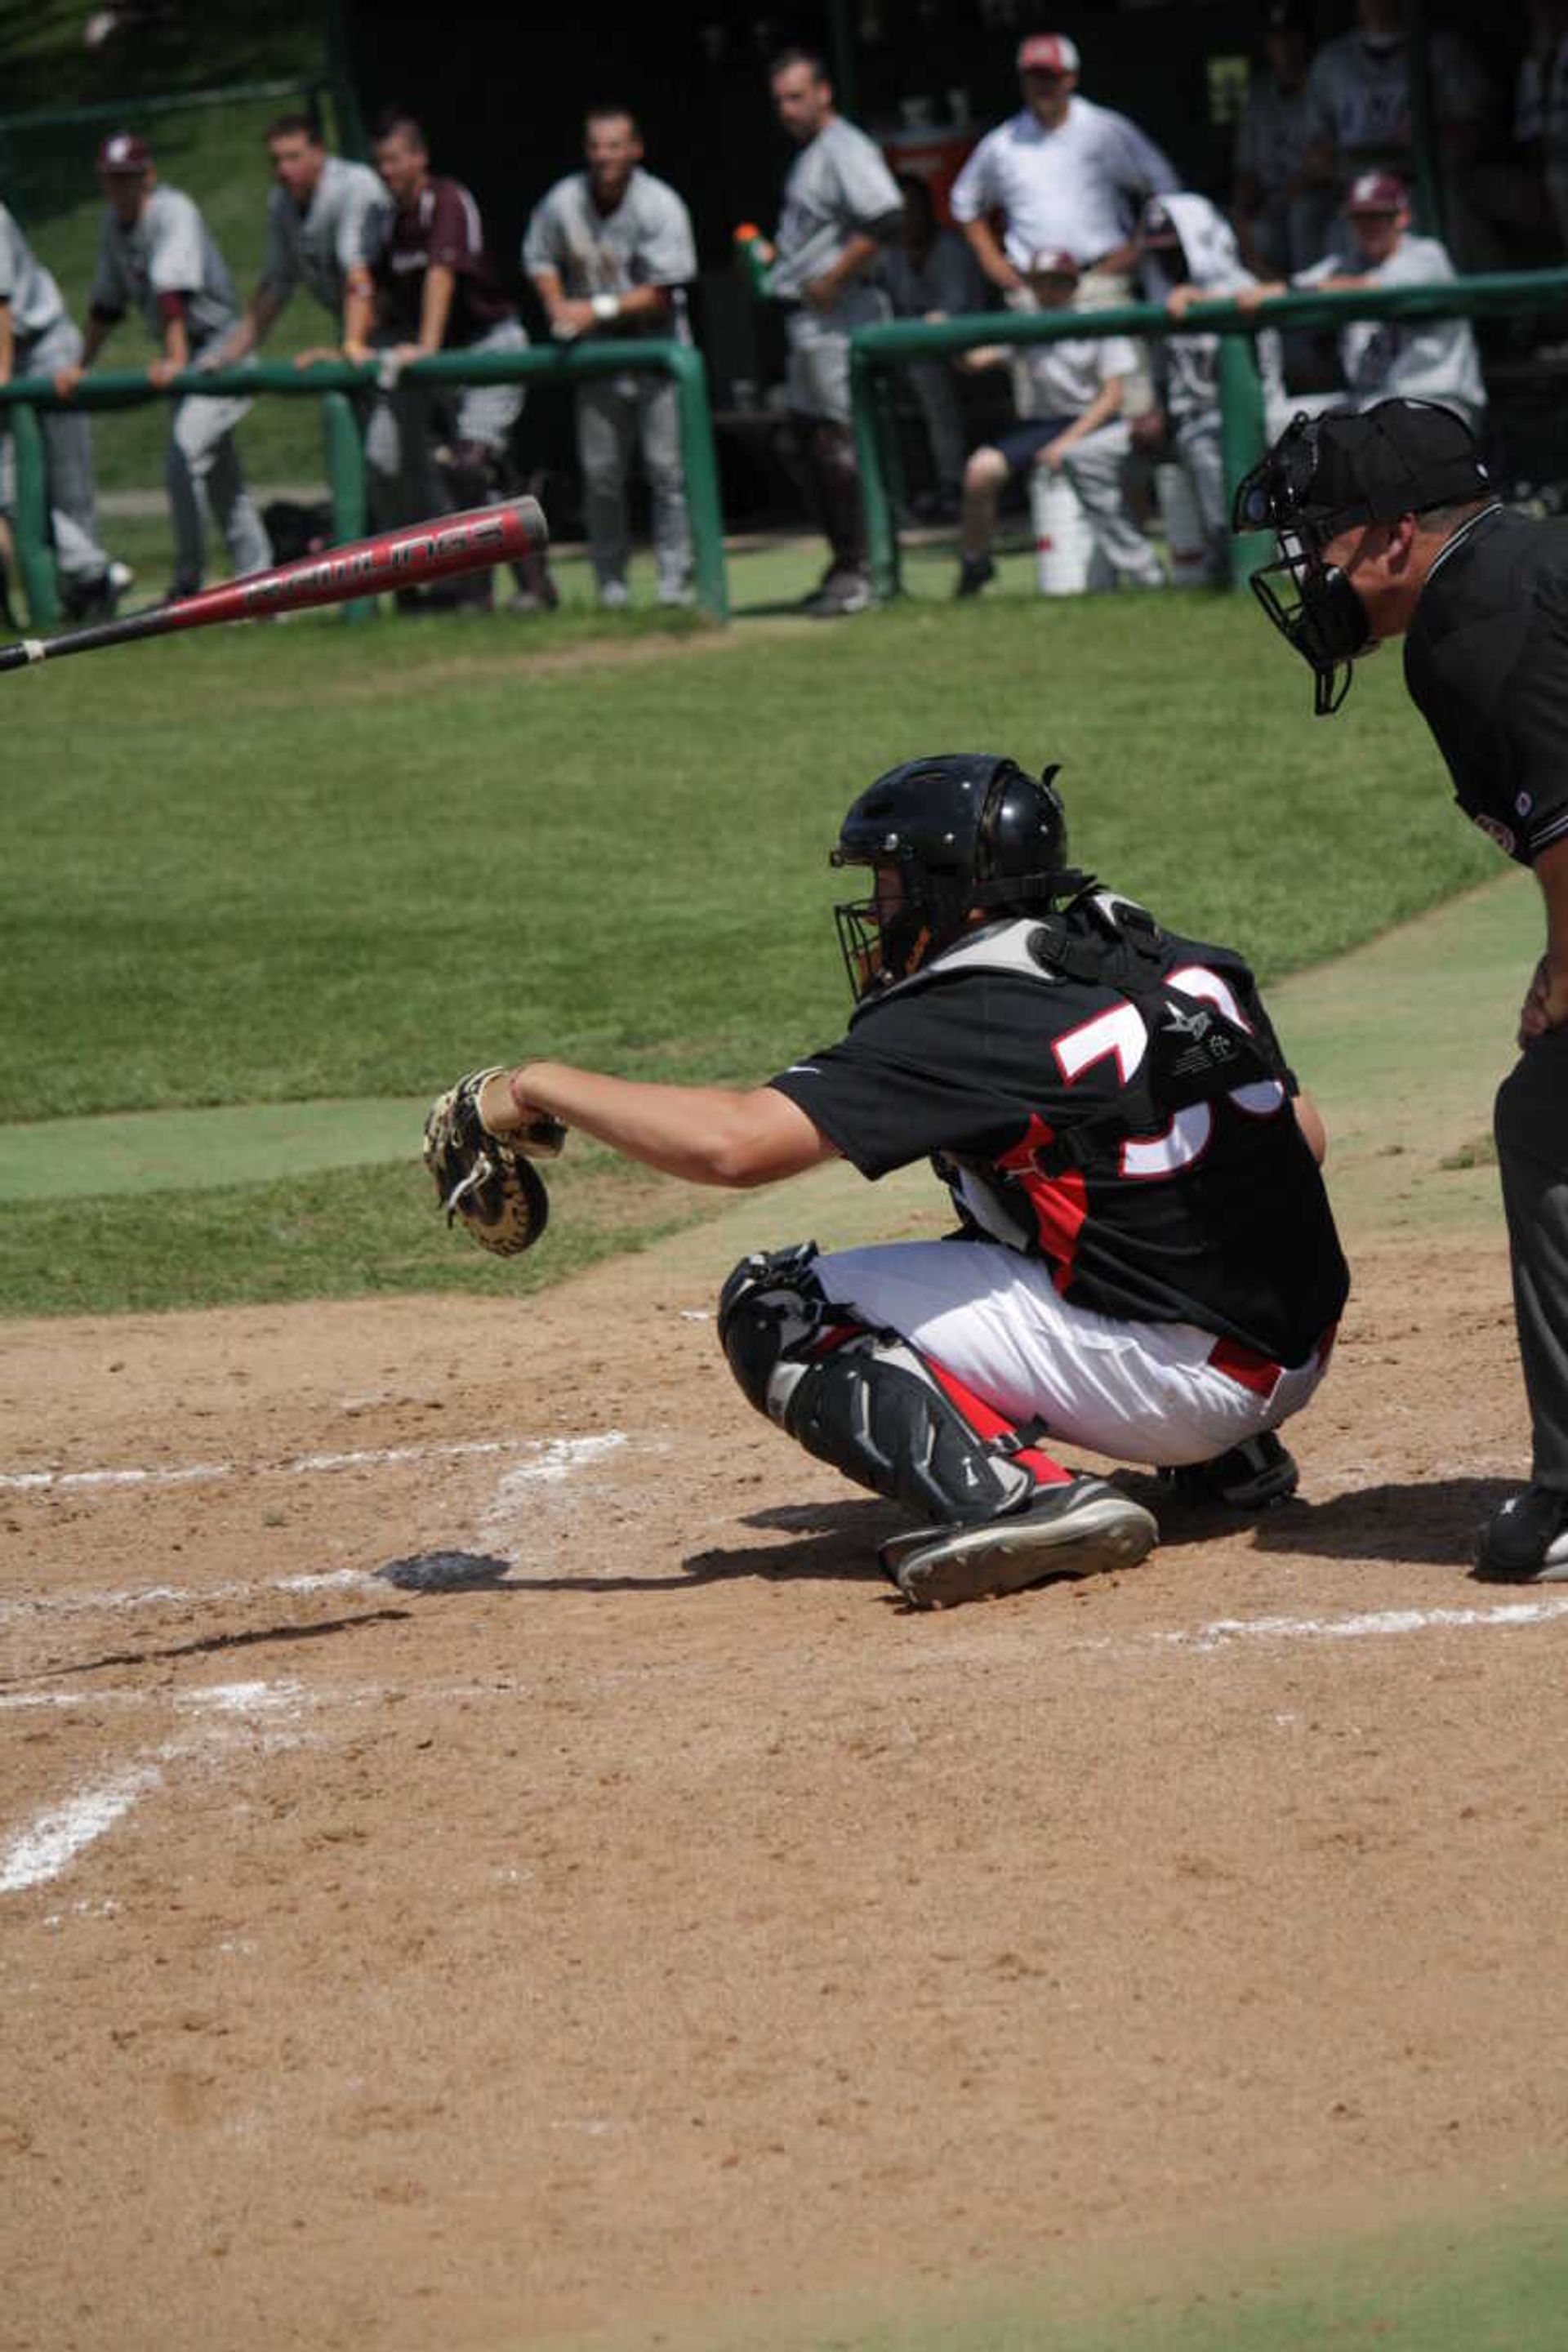 Shane Blair behind the plate during Southeast's game on Saturday. - Photo by Nathan Hamilton